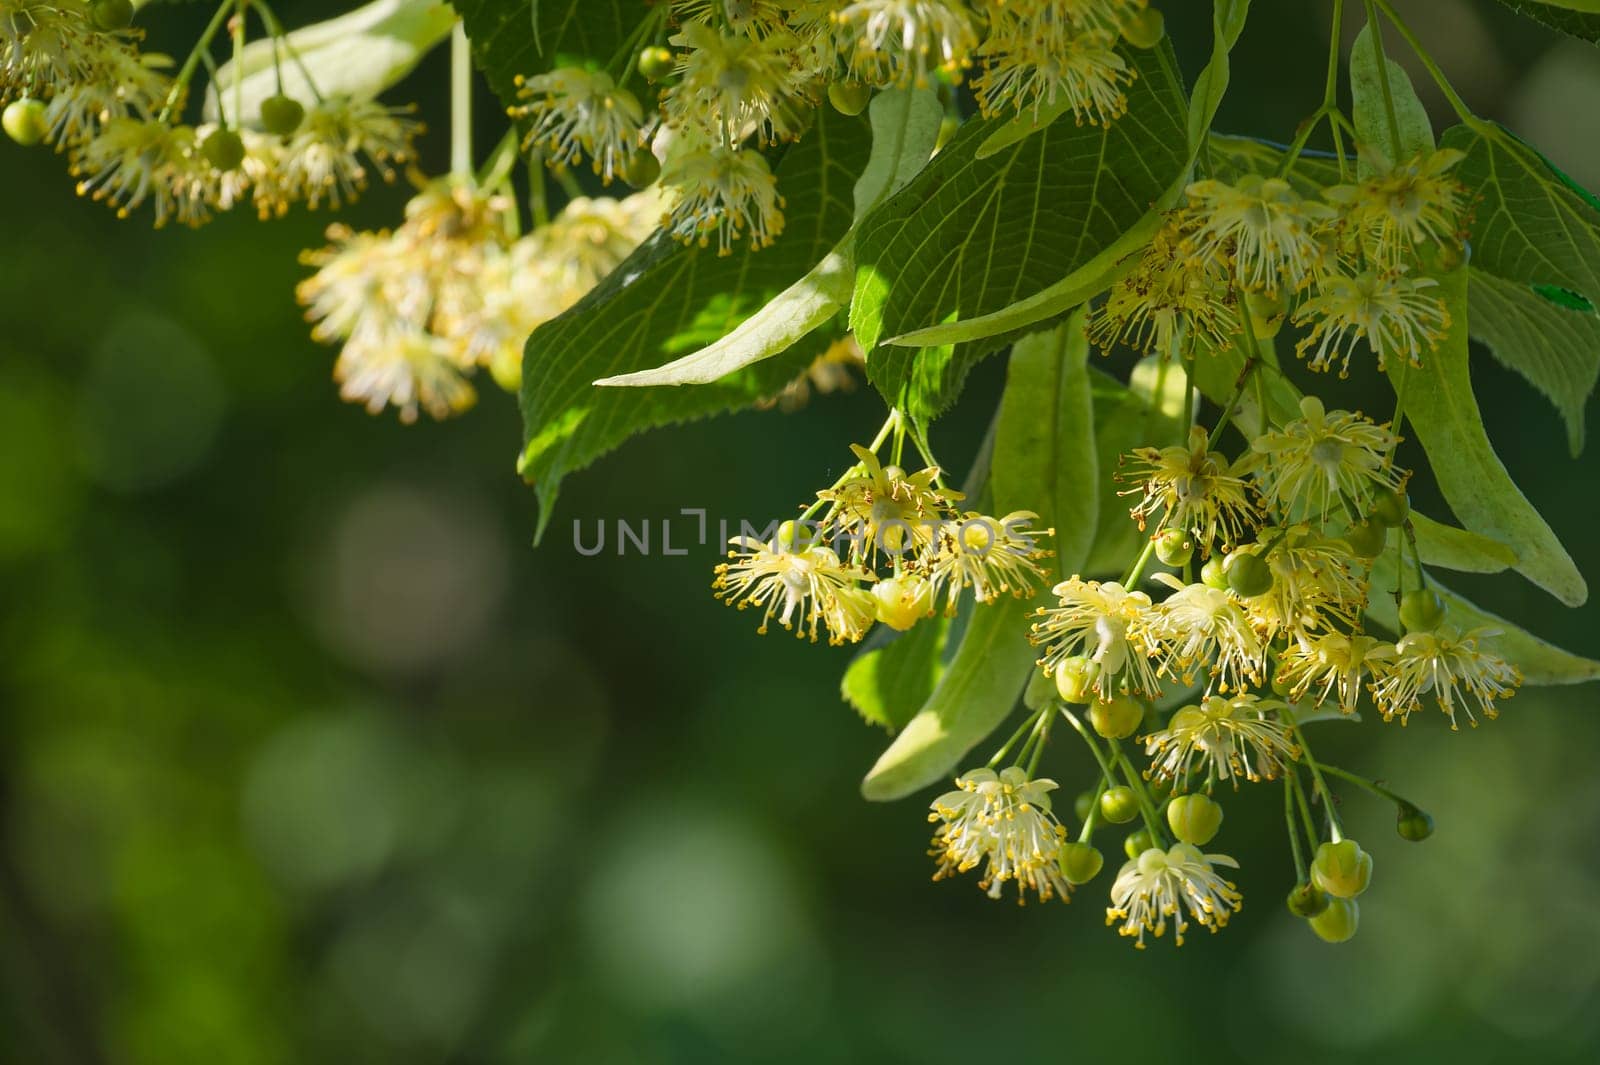 Linden tree branch prominently displaying both leaves and flowers the flowers present in varying stages of bloom